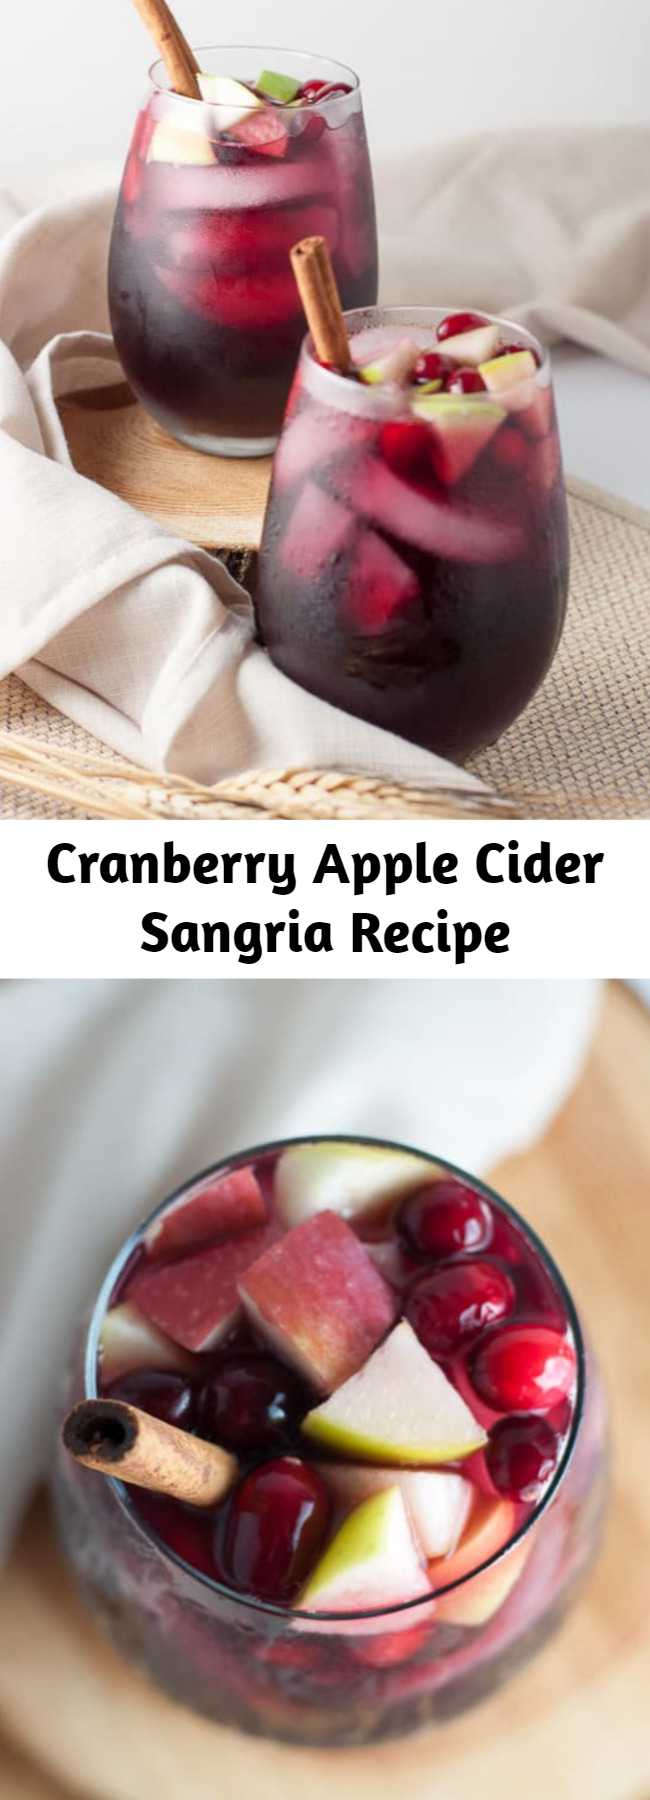 Cranberry Apple Cider Sangria Recipe - A simple recipe for Cranberry Apple Cider Sangria, made with red wine, orange liqueur, fresh cranberry juice and soft cider. Perfect for celebrating fall and winter!